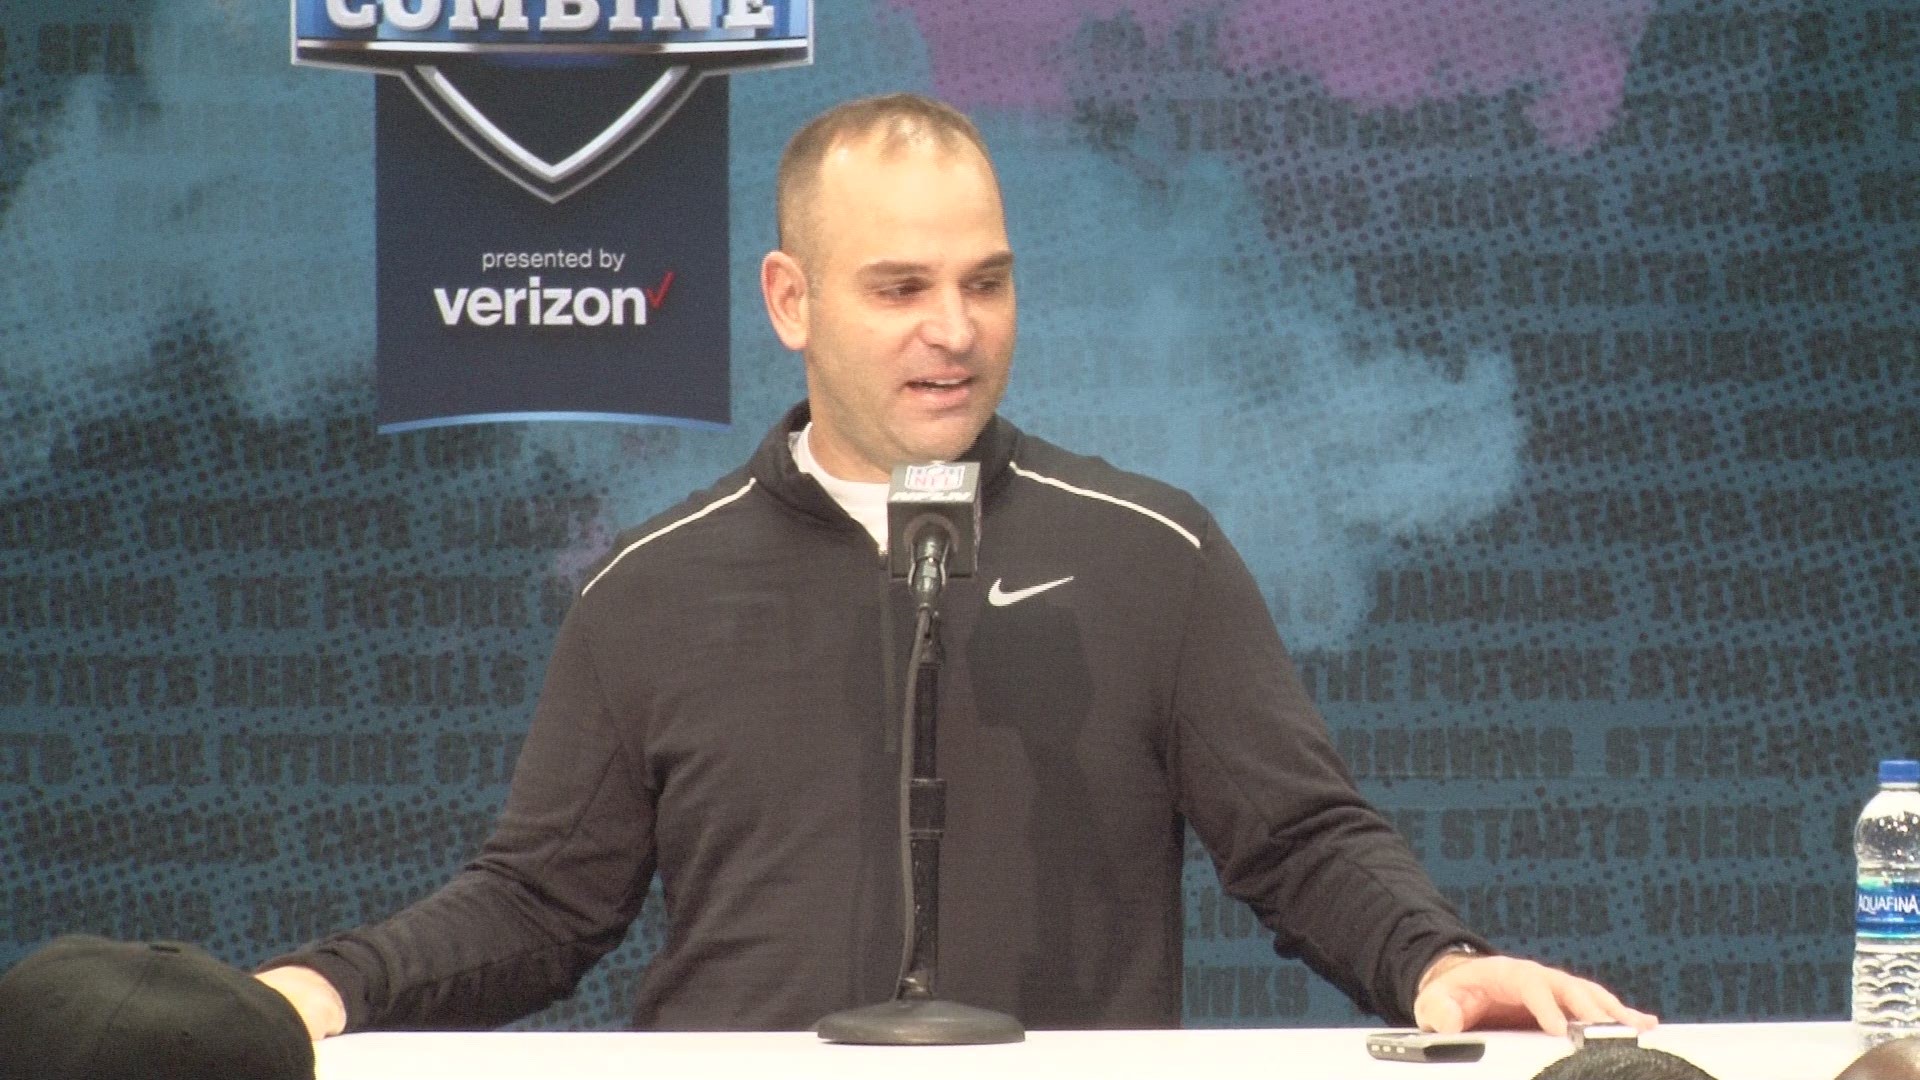 Jaguars general manager discusses upcoming free agency decisions (including Yannick Ngakoue) as well as priorities for the 2020 NFL Draft.